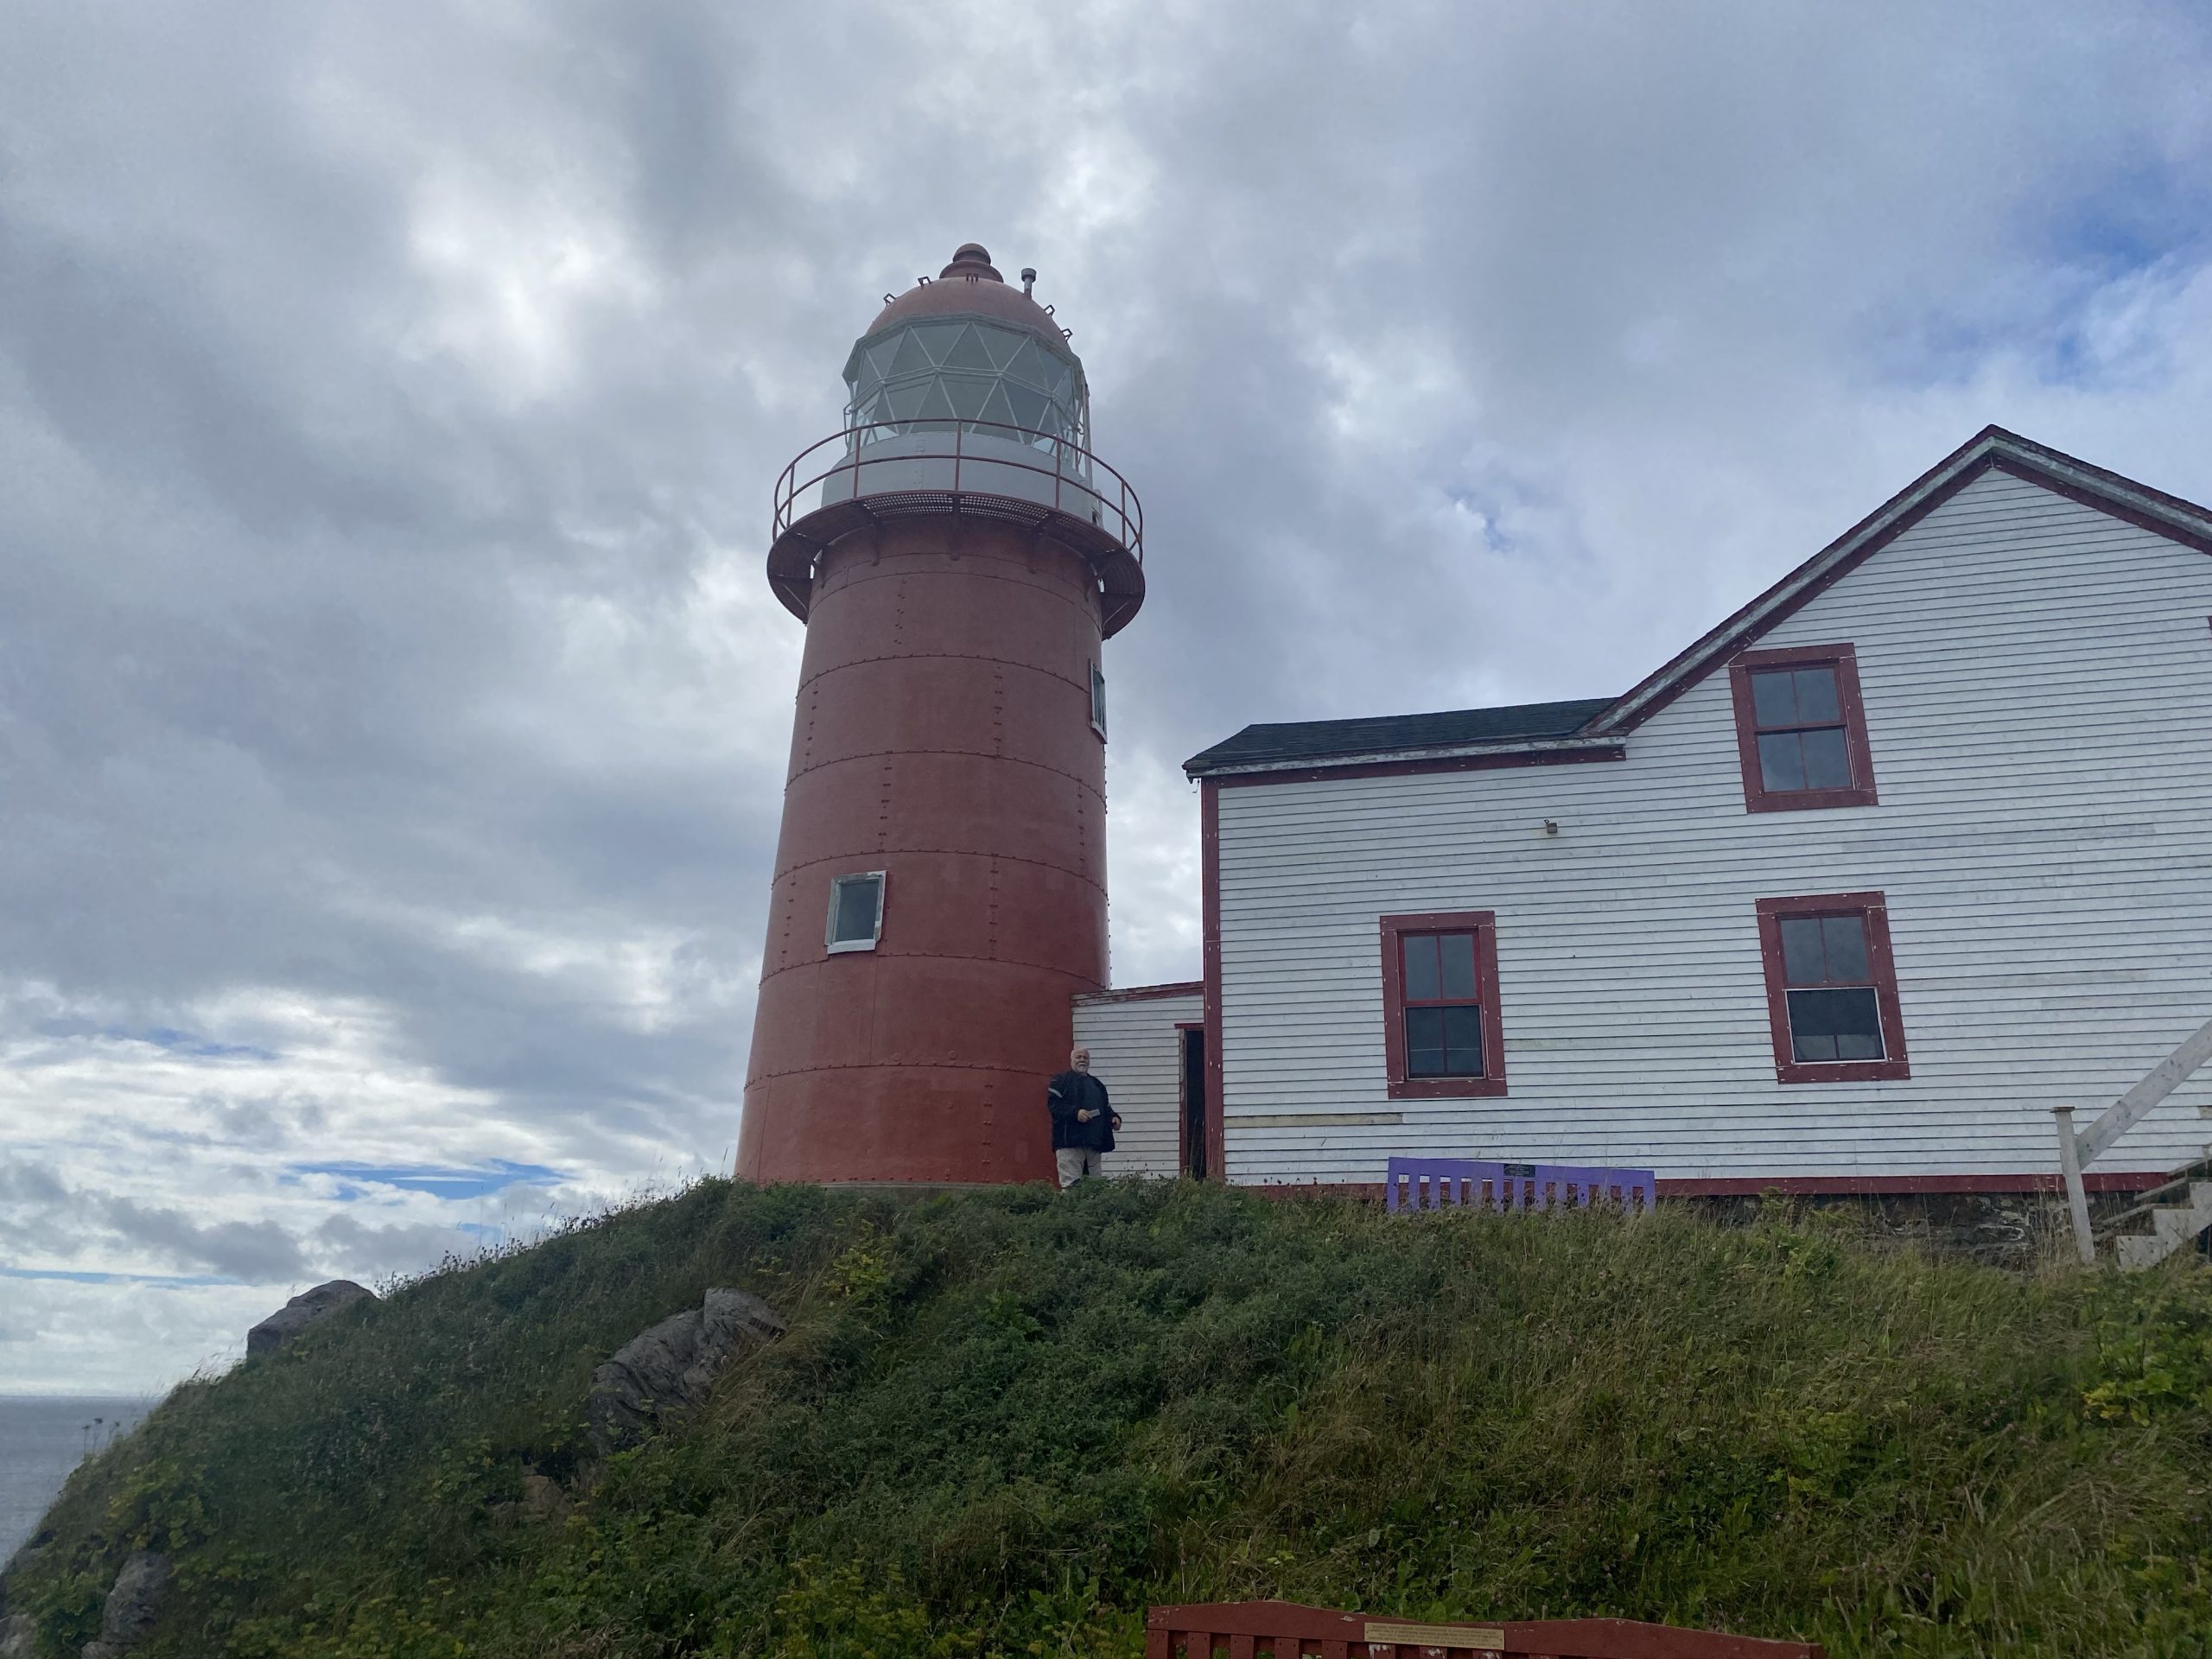 The Ferryland lighthouse in Newfoundland. Chuck is at the base of the lighthouse for scale.